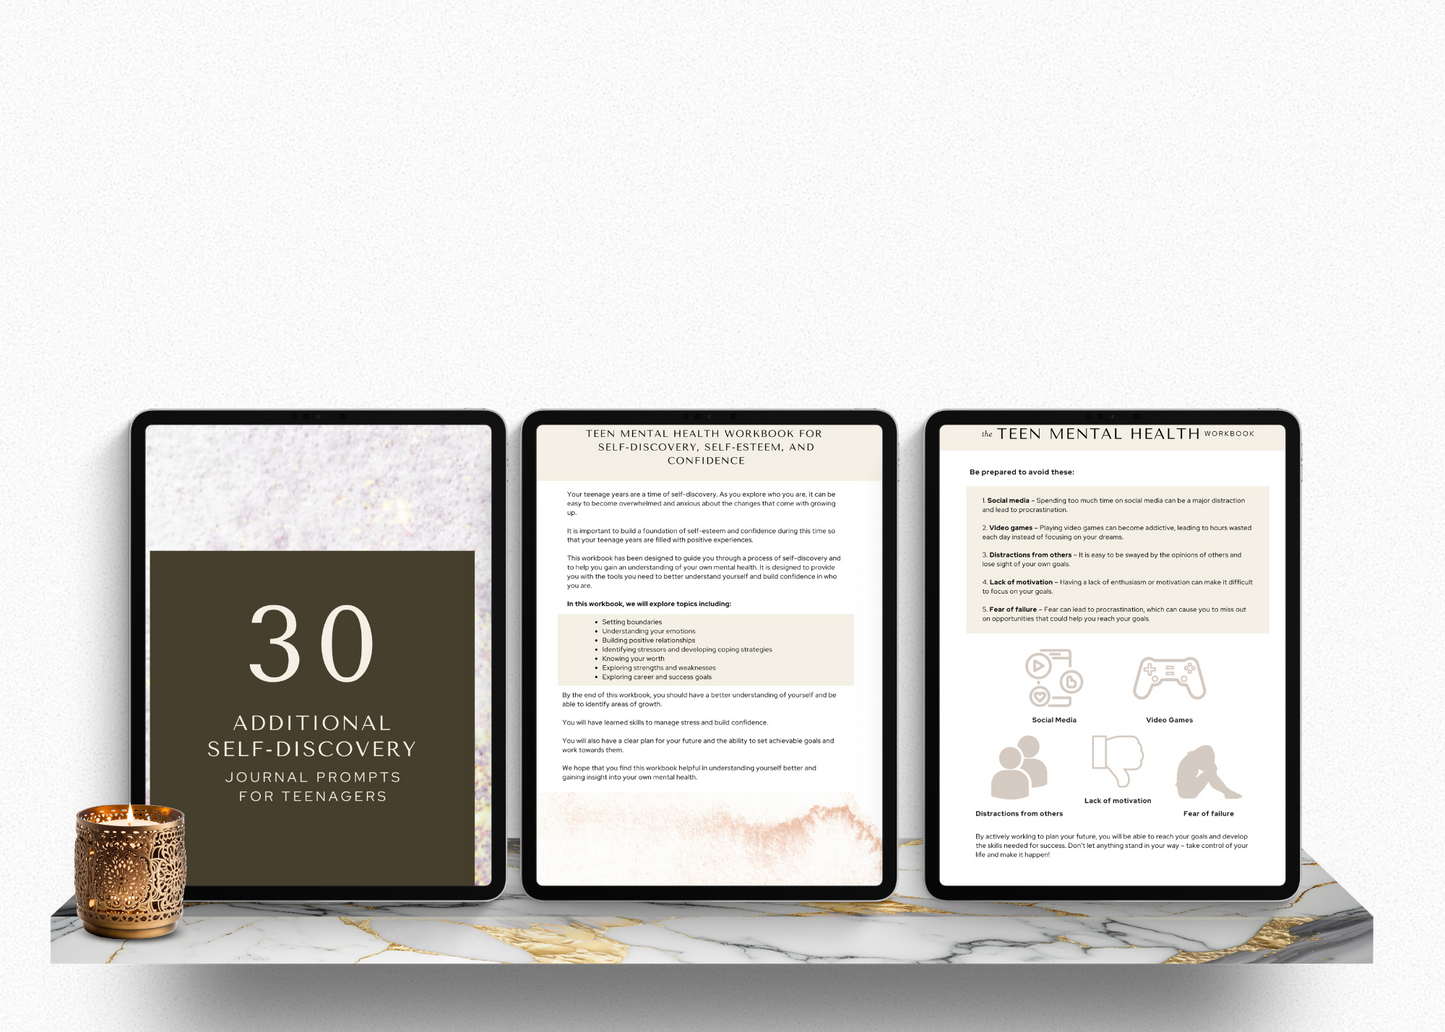 Custom Digital Teen Mental Health Workbook- For Goodnotes,- Full Customization For Your Business- Done For You Digital Product